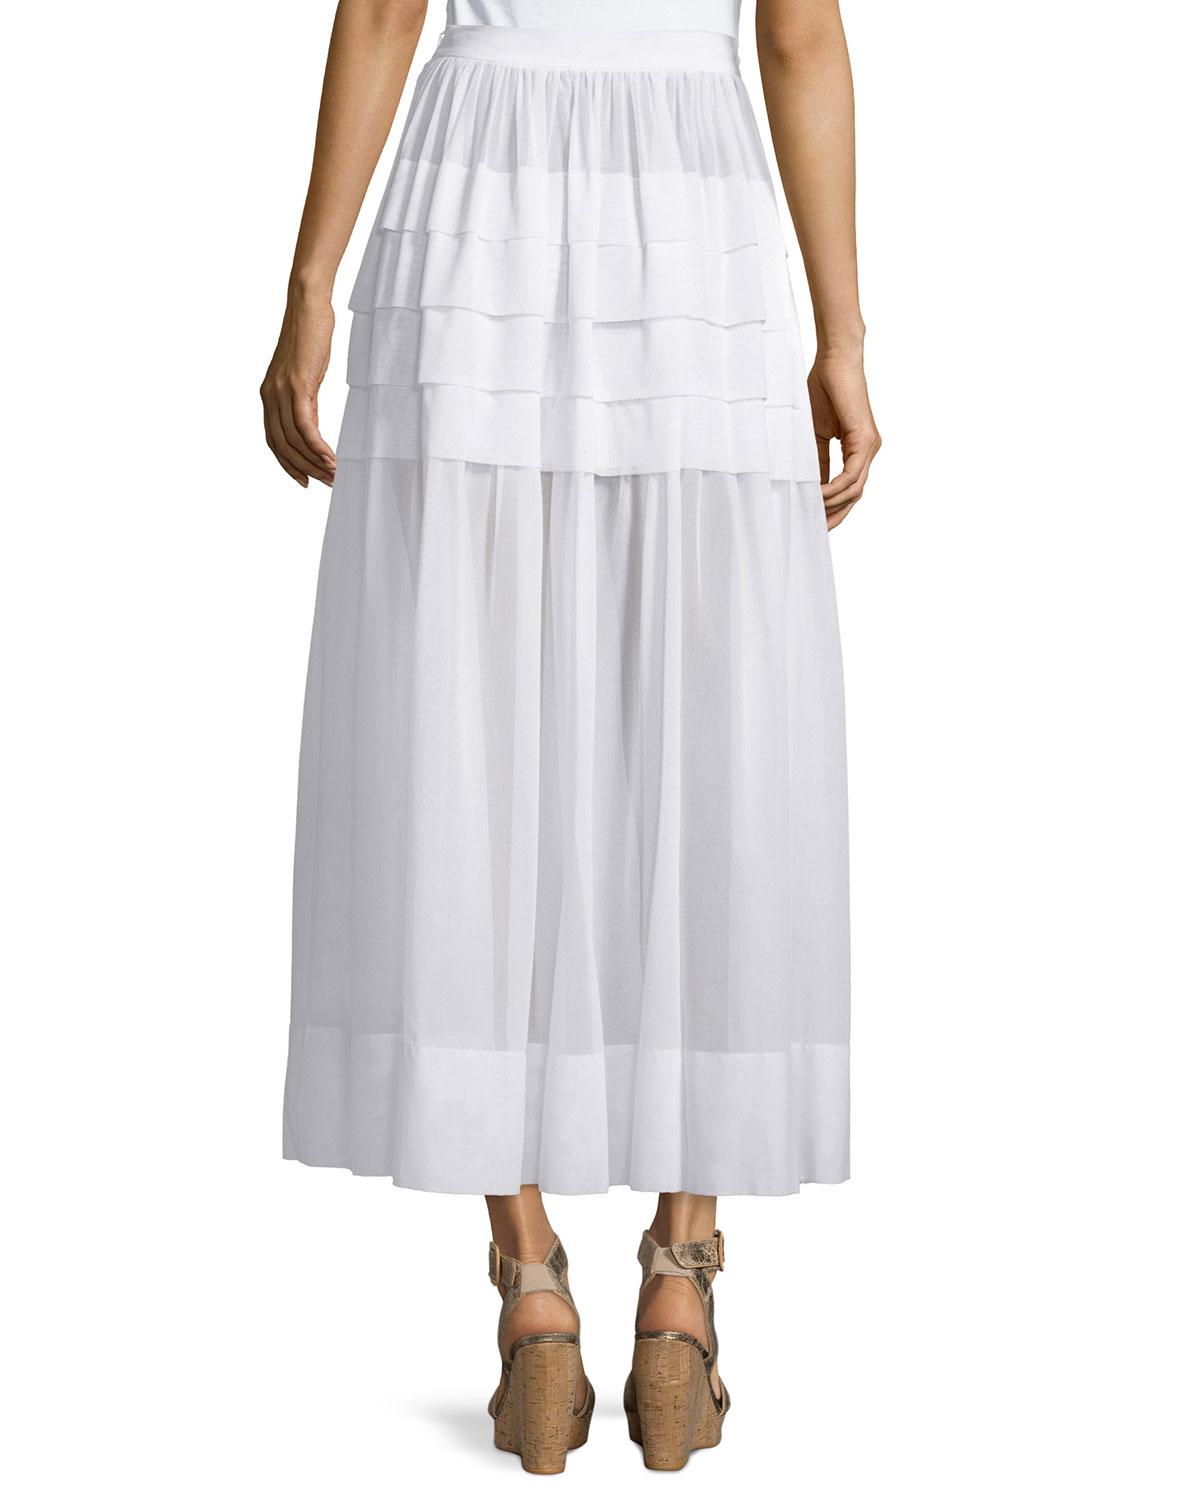 Lyst - Michael Kors Tiered Cotton Maxi Skirt in White